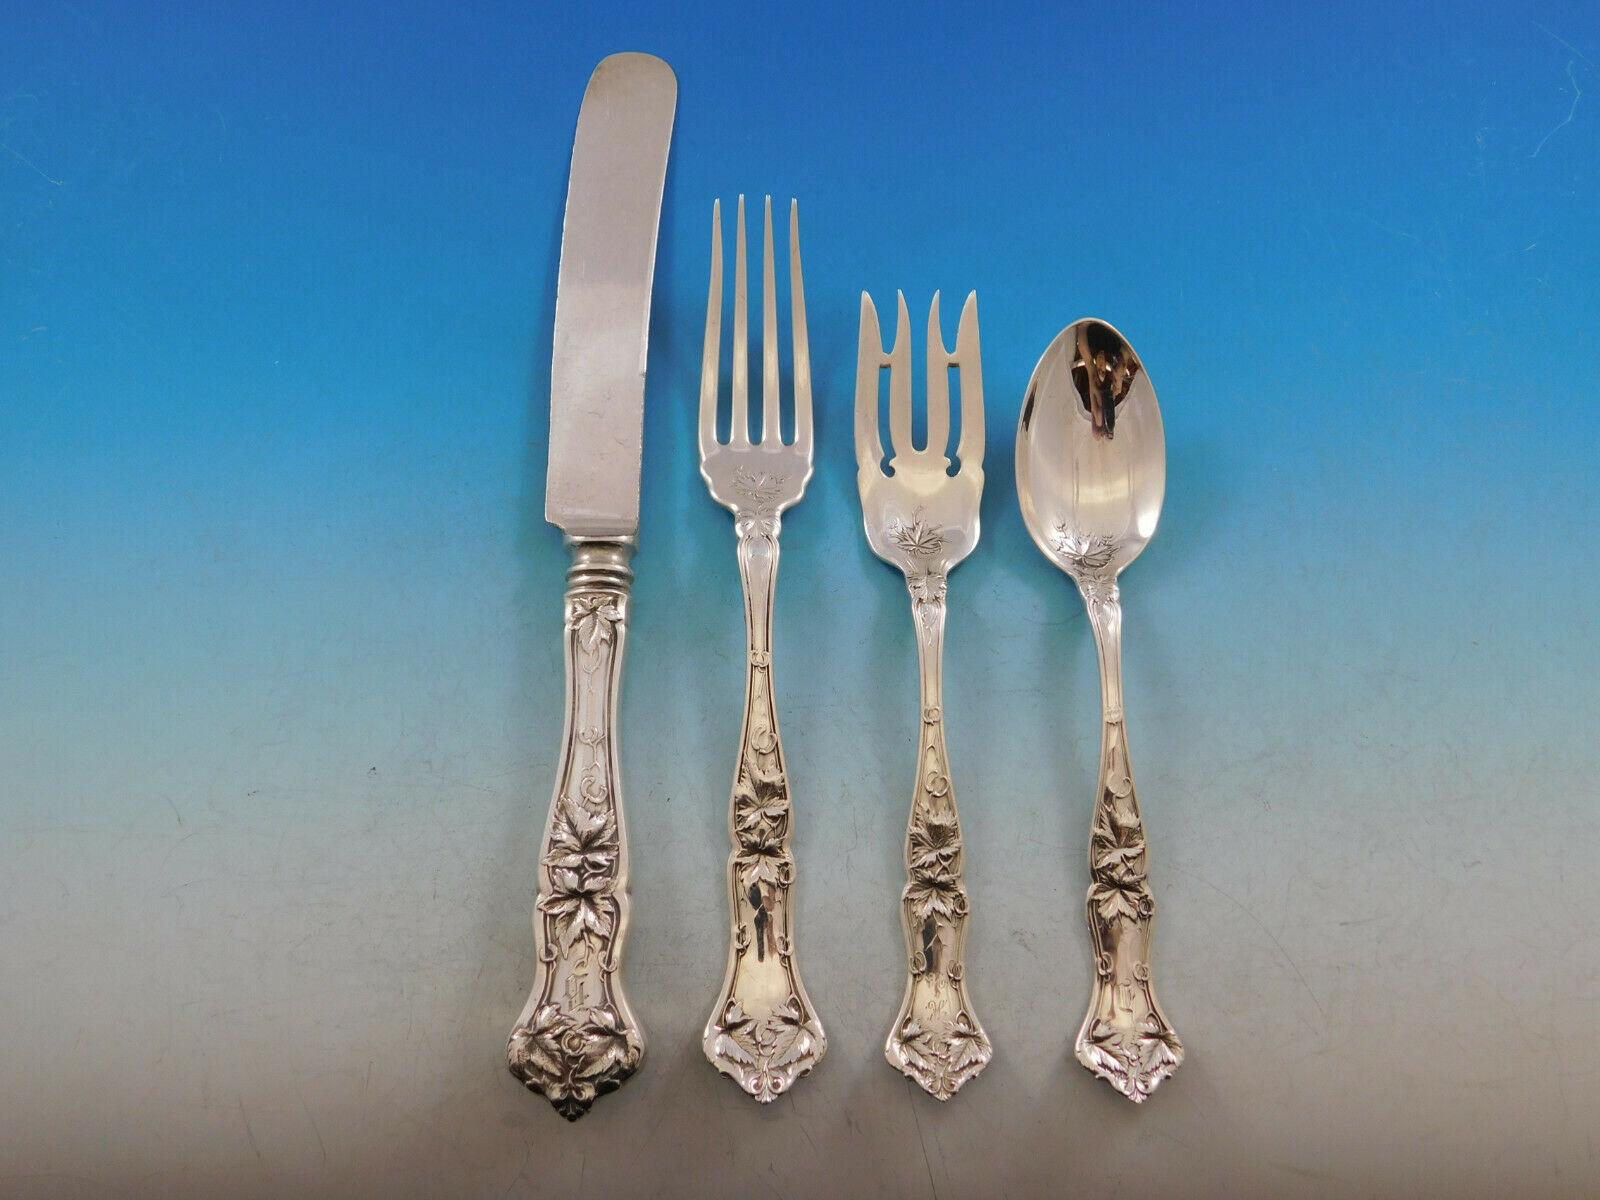 Edgewood by International Sterling Silver Flatware Set for 8 Service 89pc Dinner 5